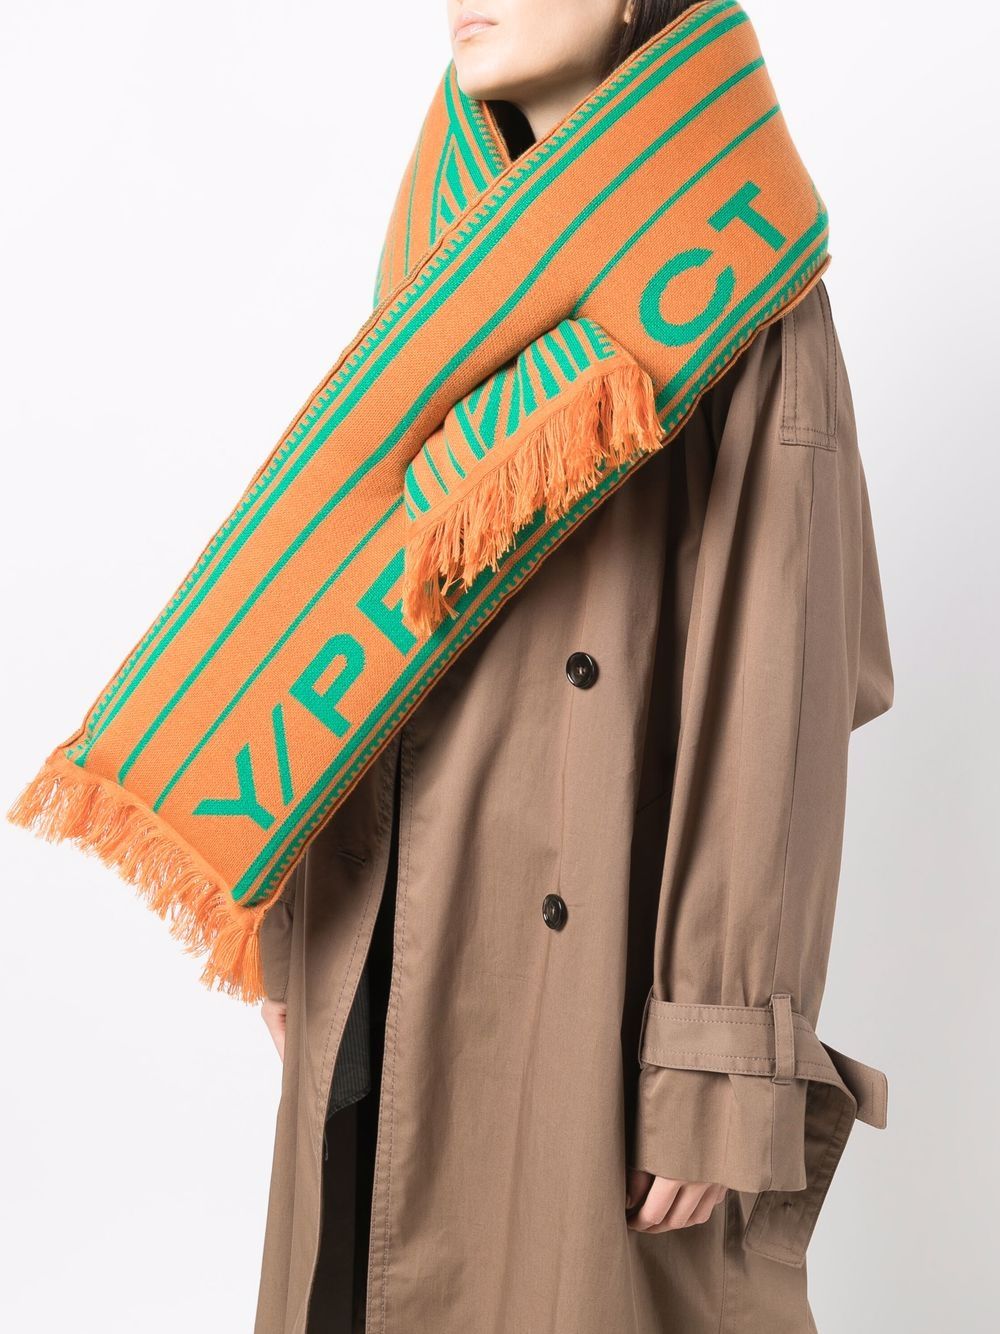 Y/Project logo embroidered scarf